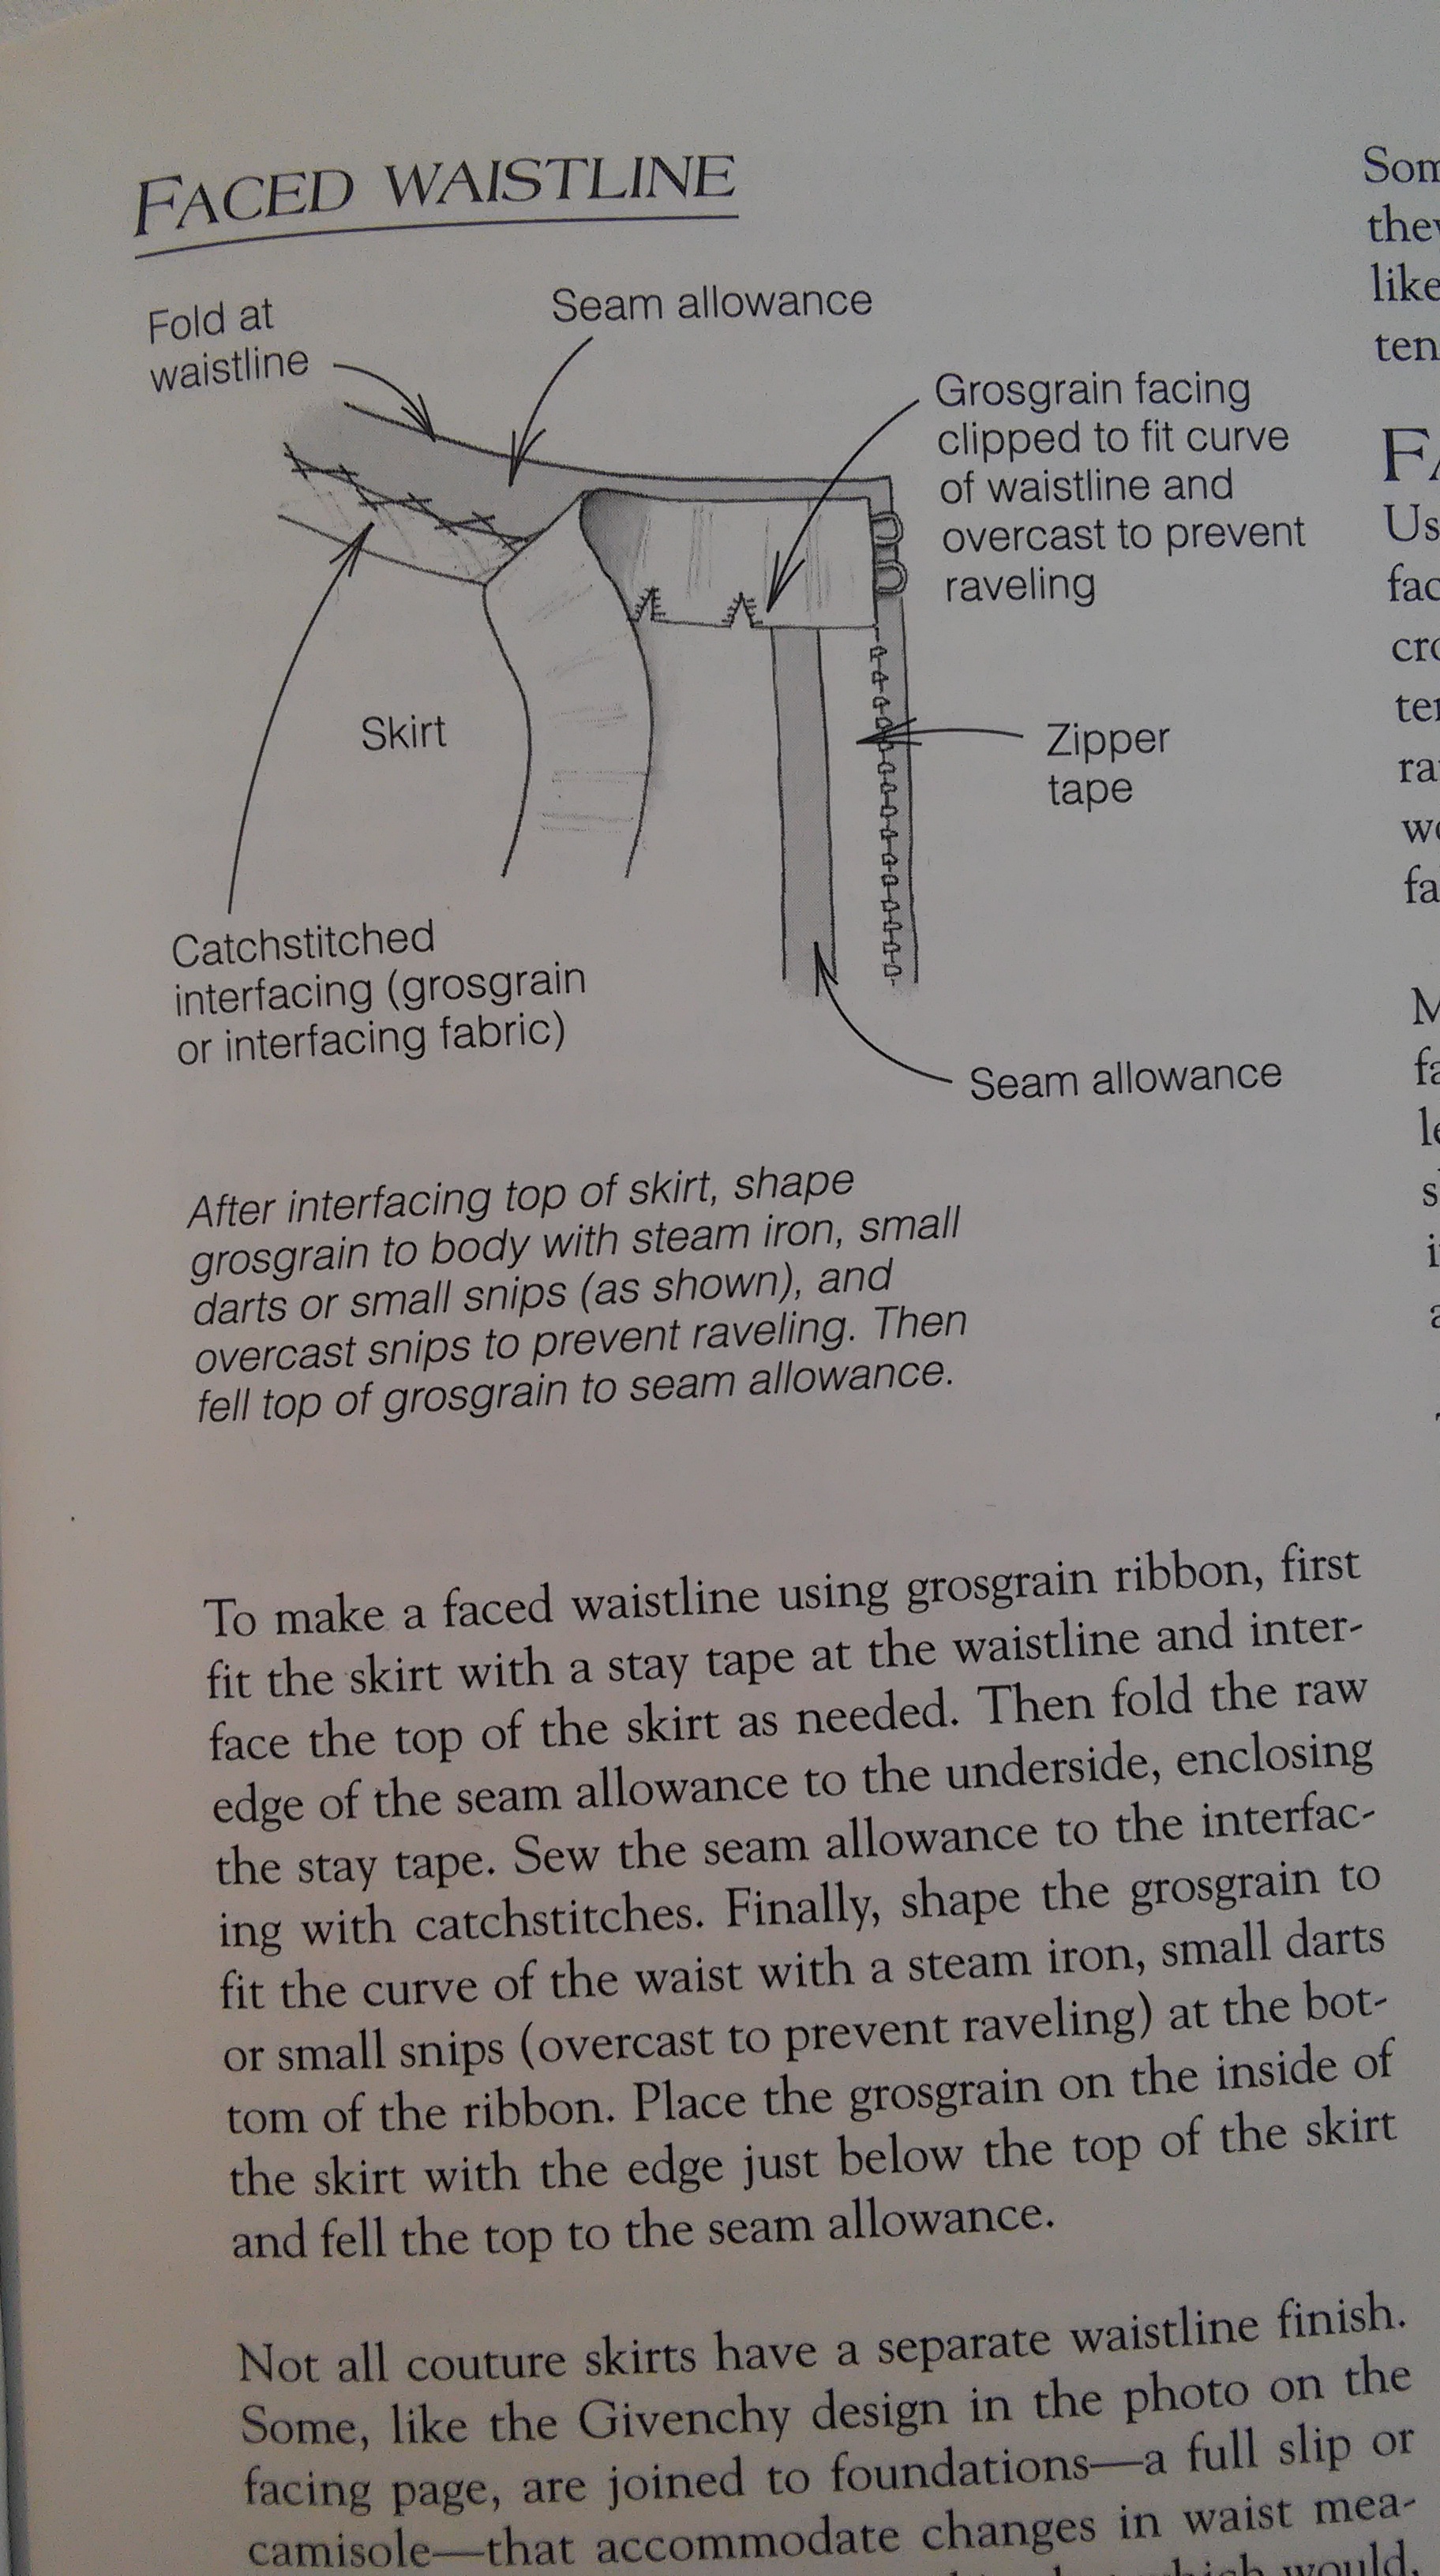 text from book about how to sew a petersham faced waistband by hand